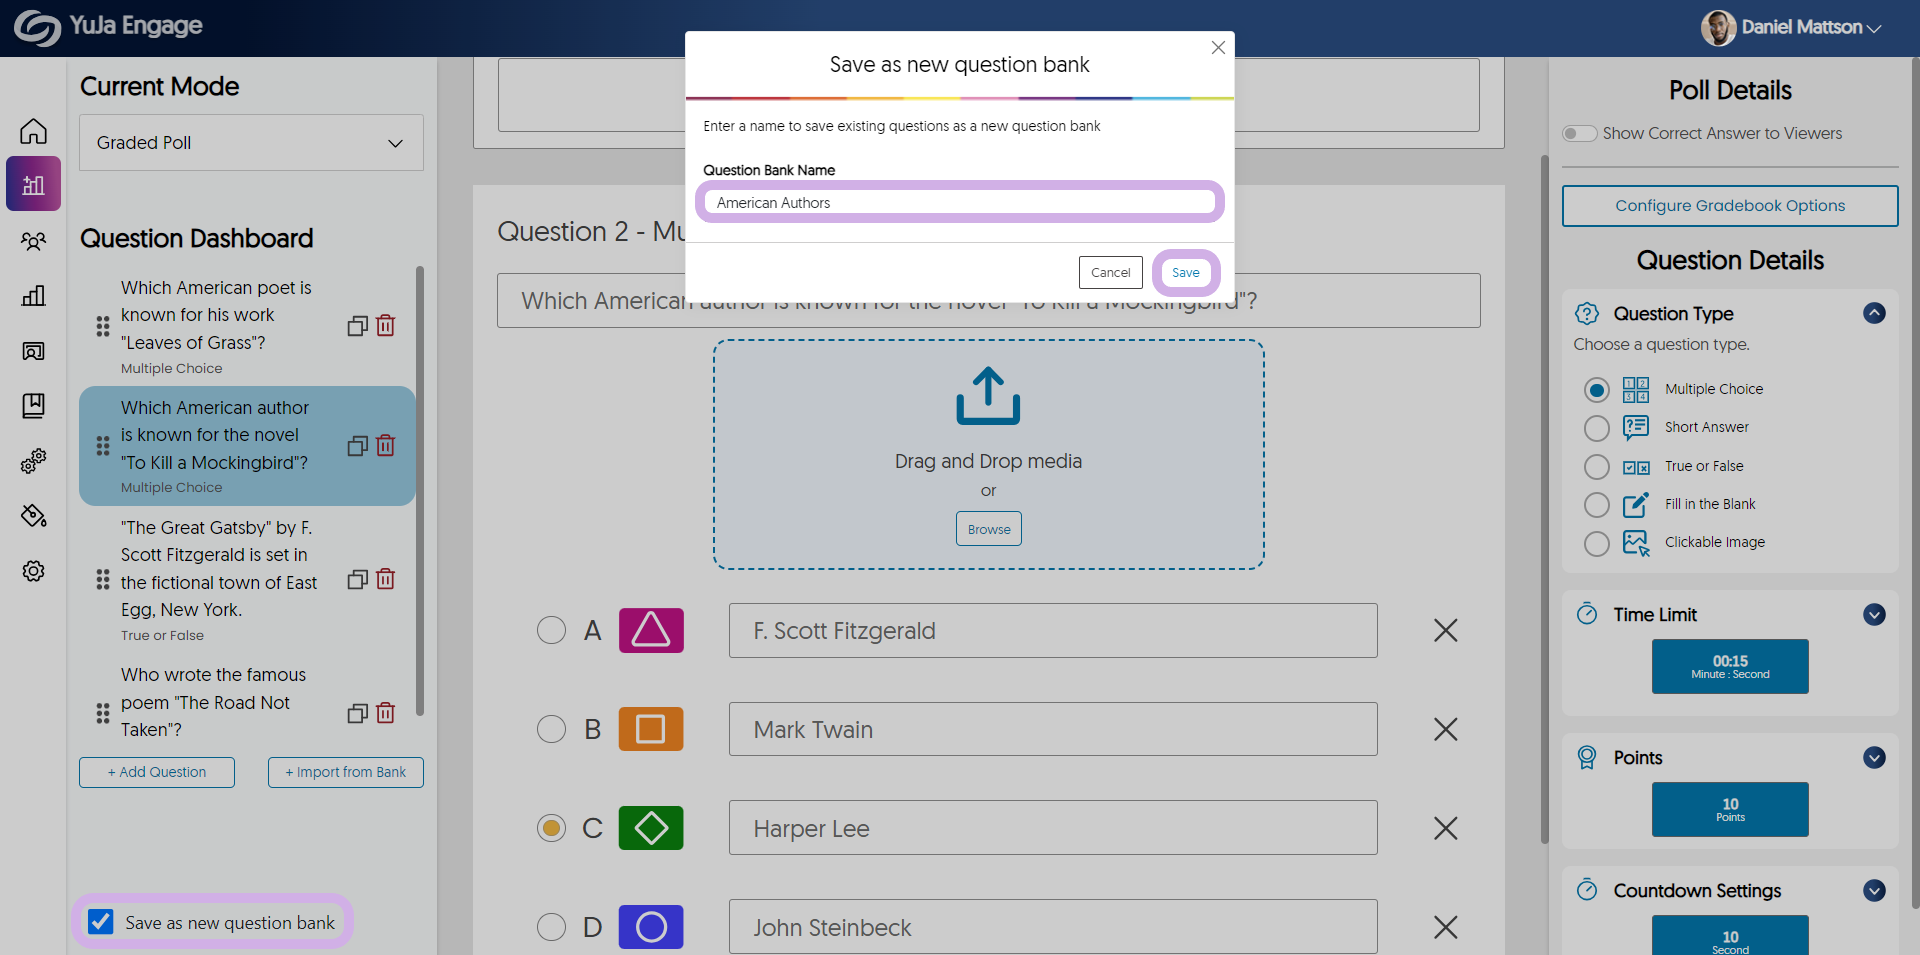 Save as new question bank is check and the modal for naming the question bank is shown.